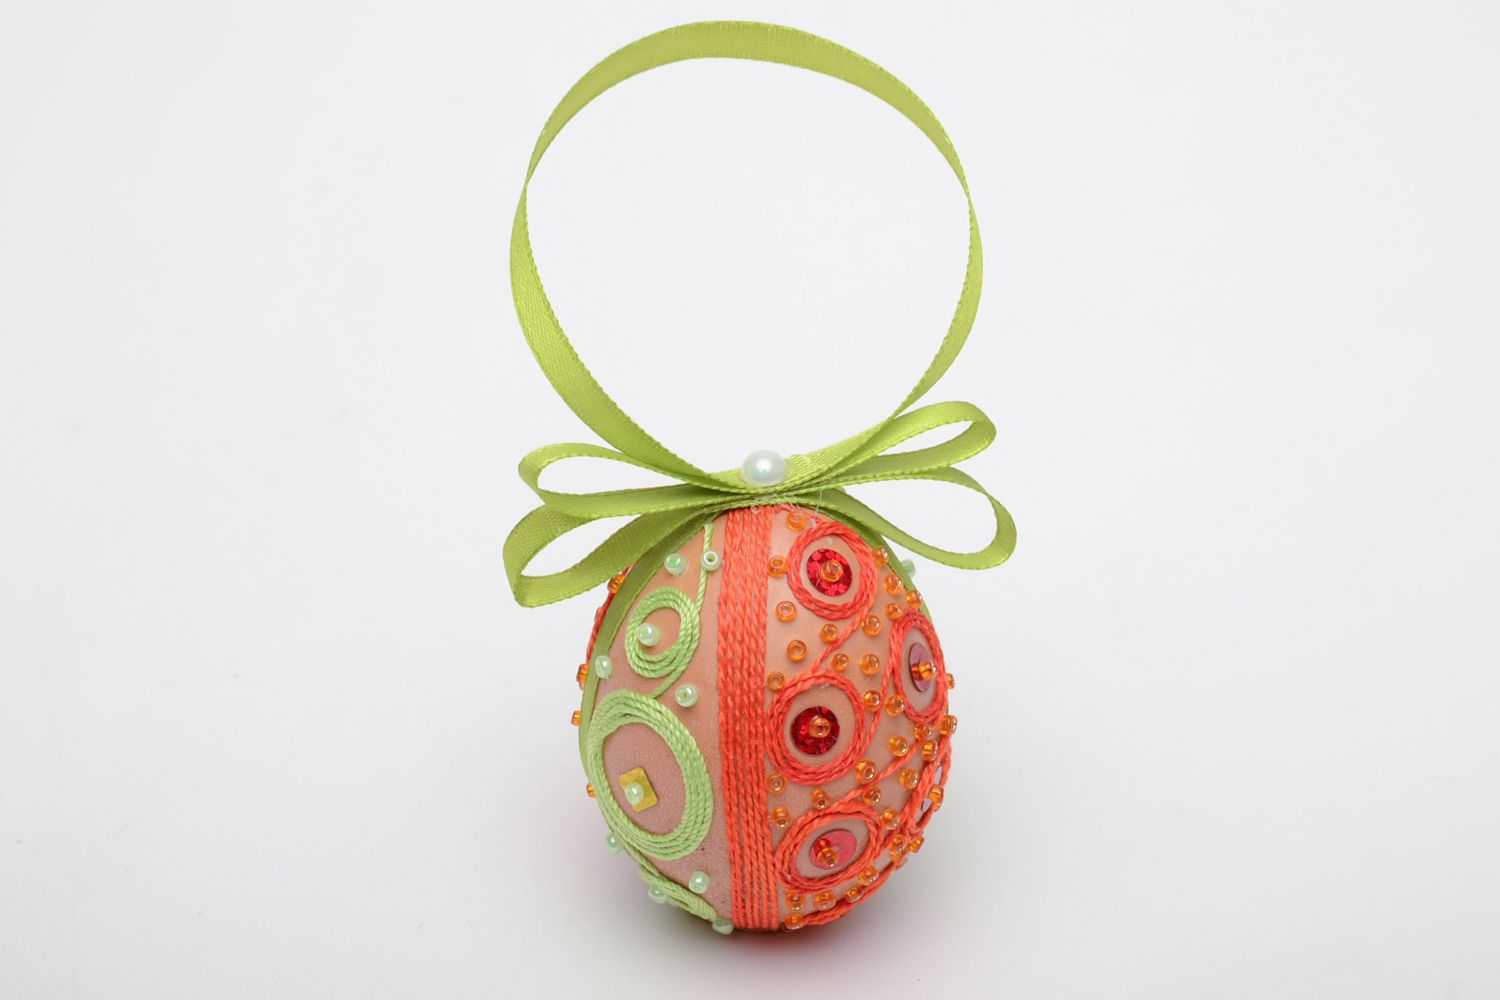 Interior hanging egg with beads and paillettes photo 2